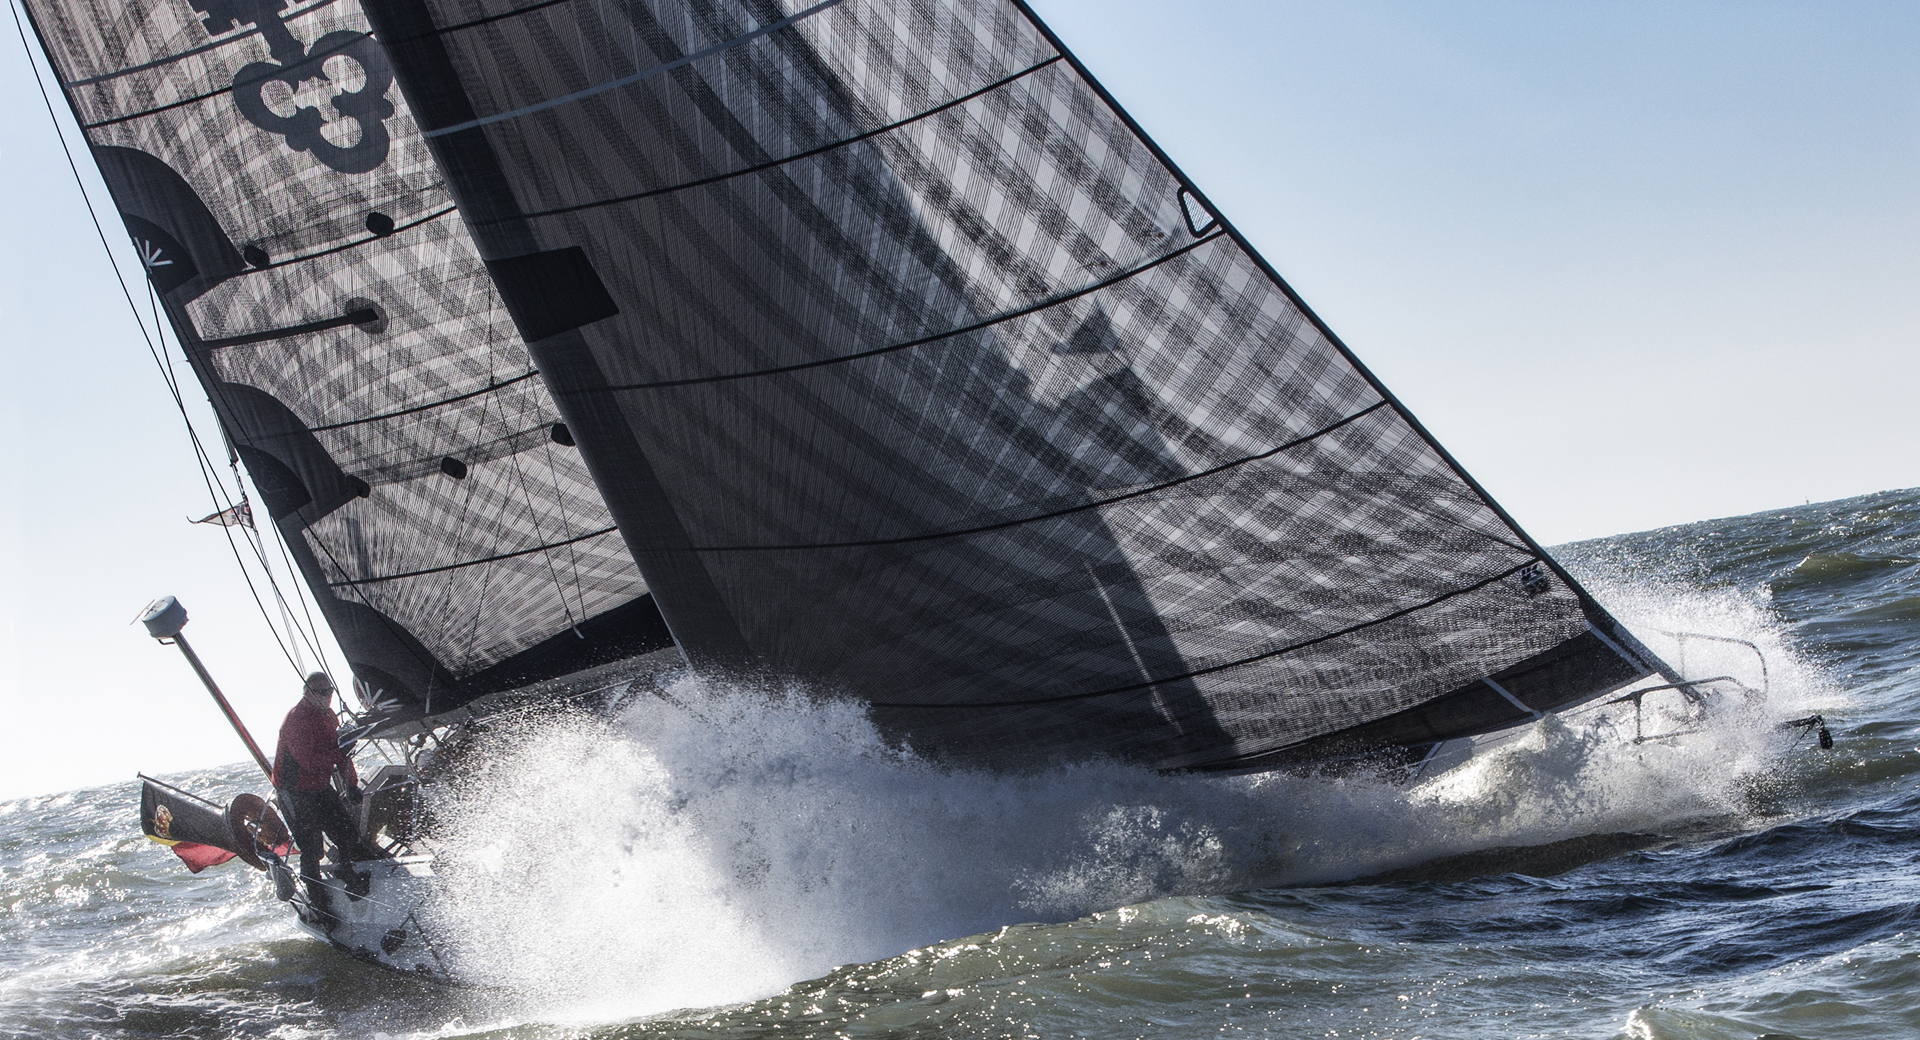 Depending on the boat size, performance level, weight and price, carbon X-Drive load-path fibers can be bonded to laminates reinforced with aramid scrims as shown above, or laminates reinforced with polyester scrims. Both laminates can gain chafe pr…